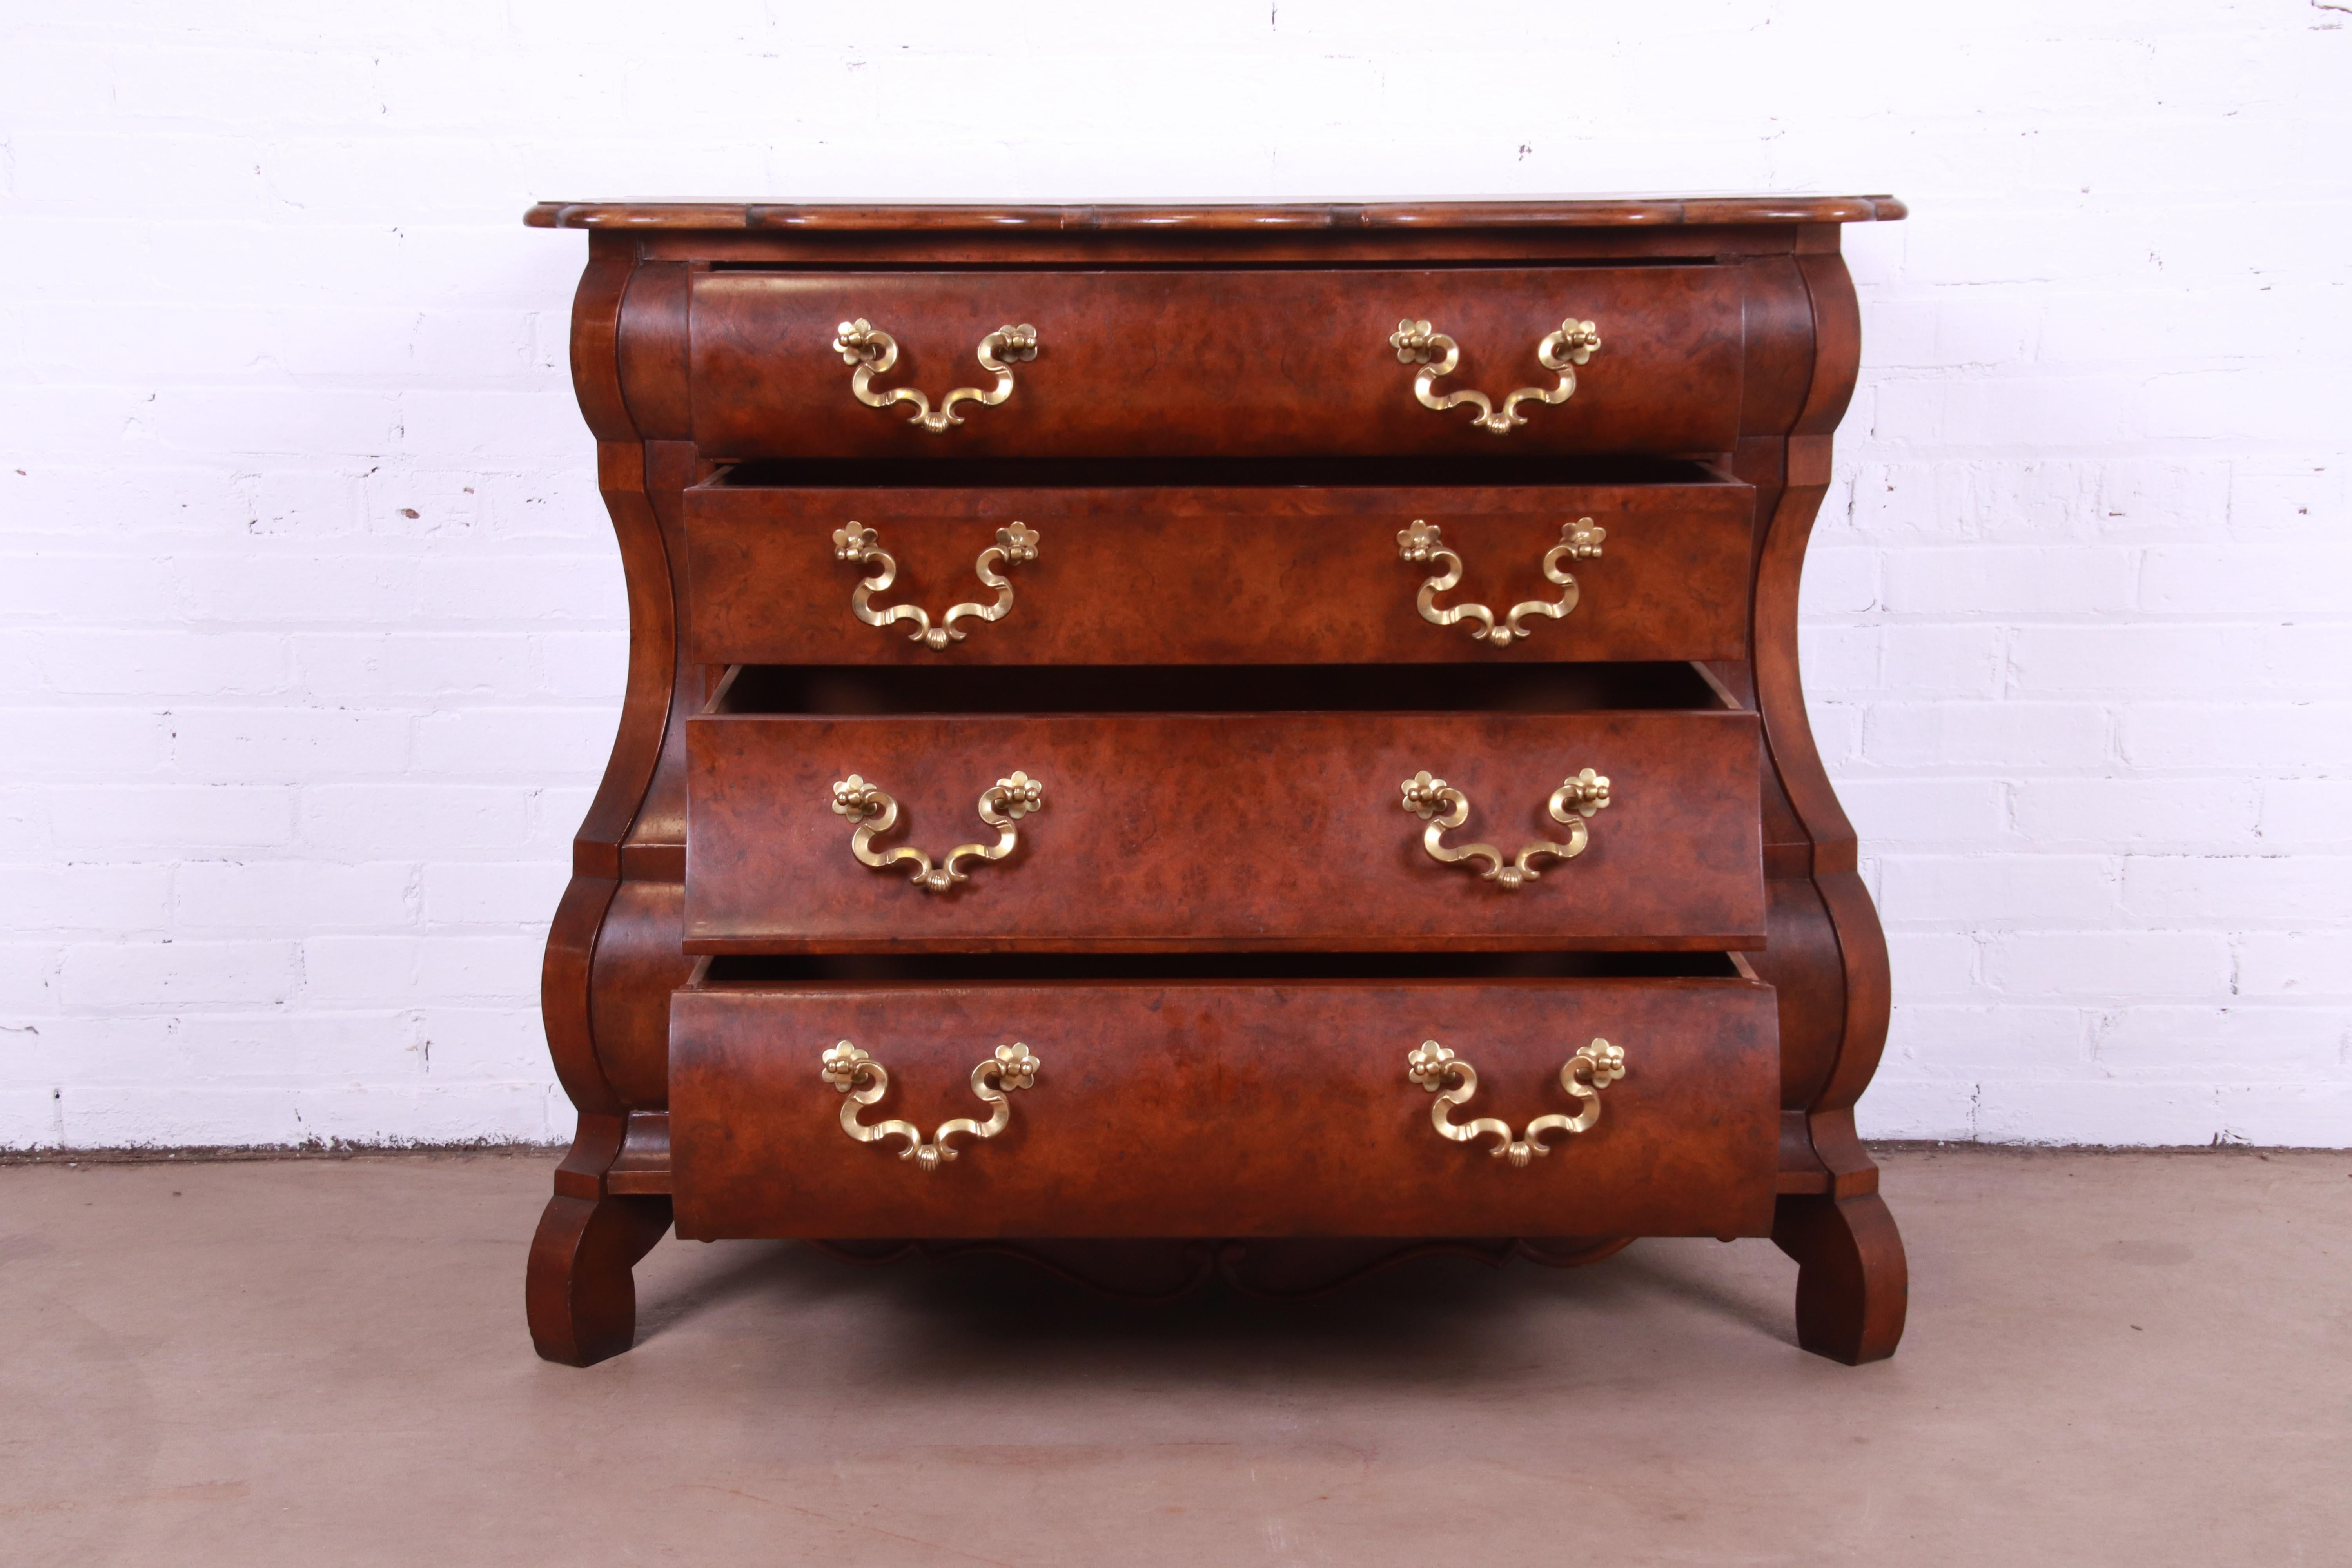 Brass Baker Furniture Dutch Burled Walnut Bombe Chest or Commode